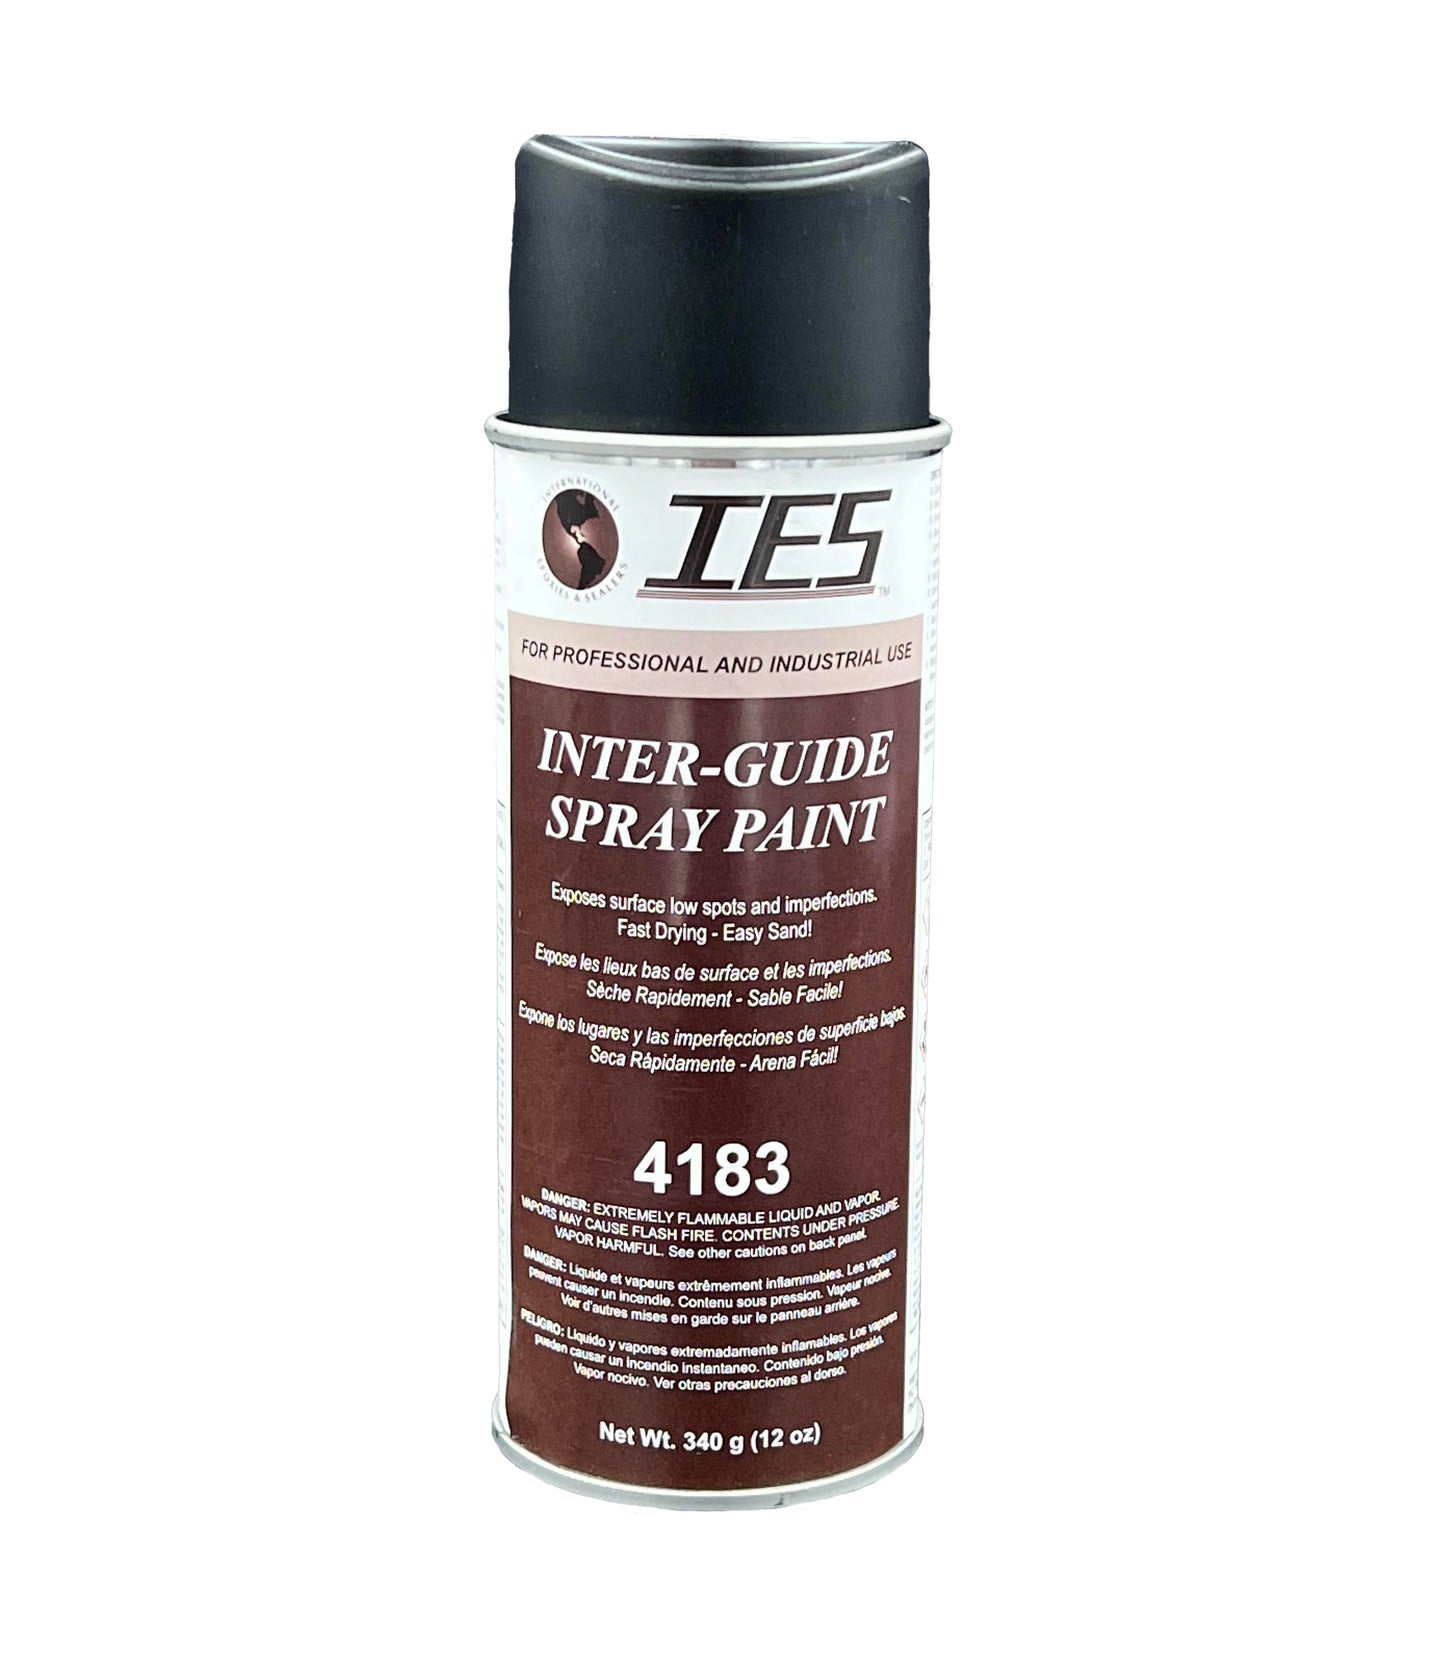 Inter-Guide Spray Paint "Guide Coat"